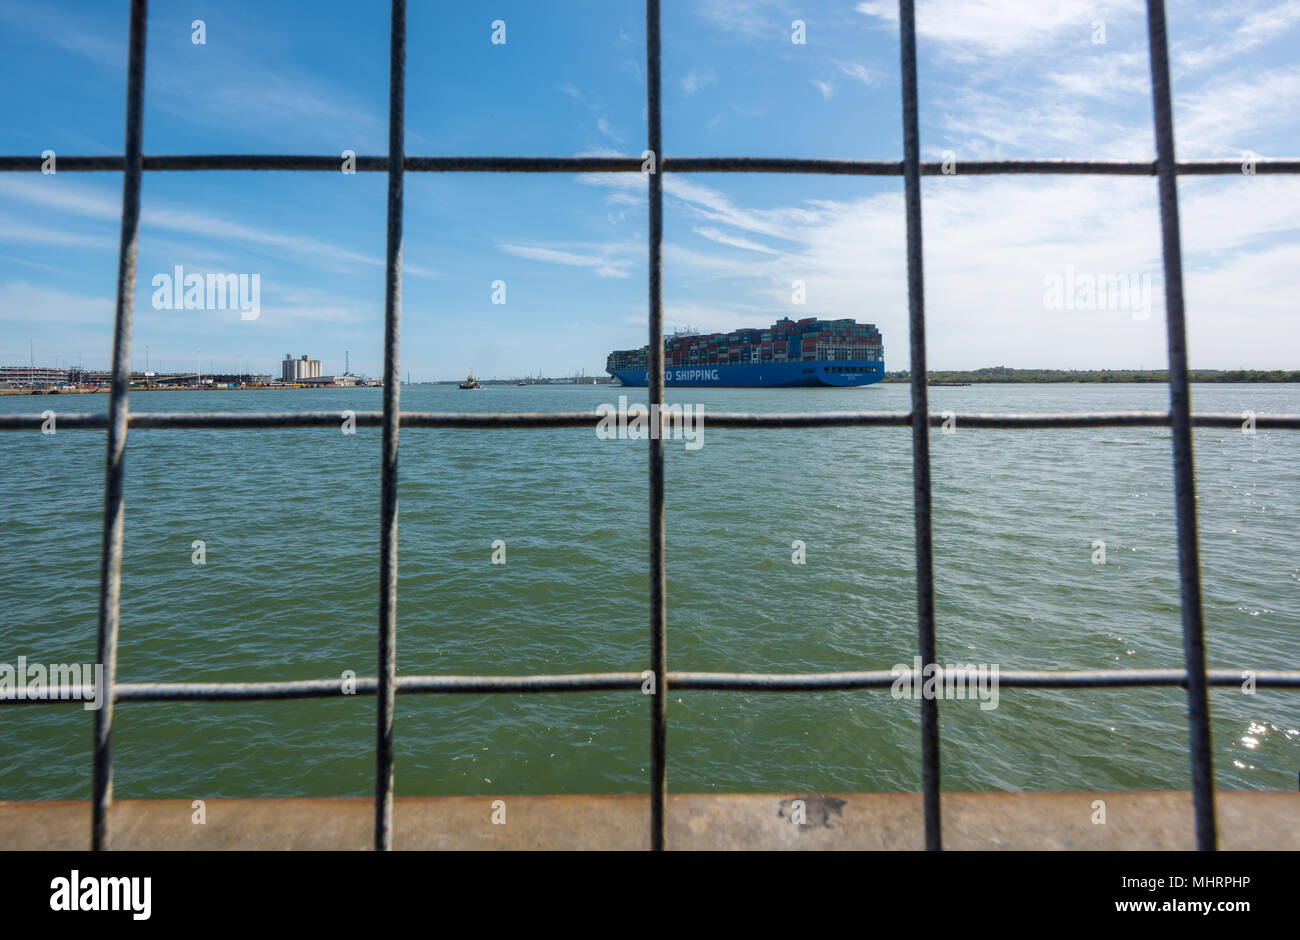 Southampton, UK. 3rd May, 2018. The Cosco Shipping Himalayas huge container ship sailing from the port of Southampton fully loaded with containers full of british goods being exported to worldwide businesses. International exports befor Brexit to Europe and the rest of the world from british businesses and manufacturing organisations. Credit: Steve Hawkins Photography/Alamy Live News Stock Photo